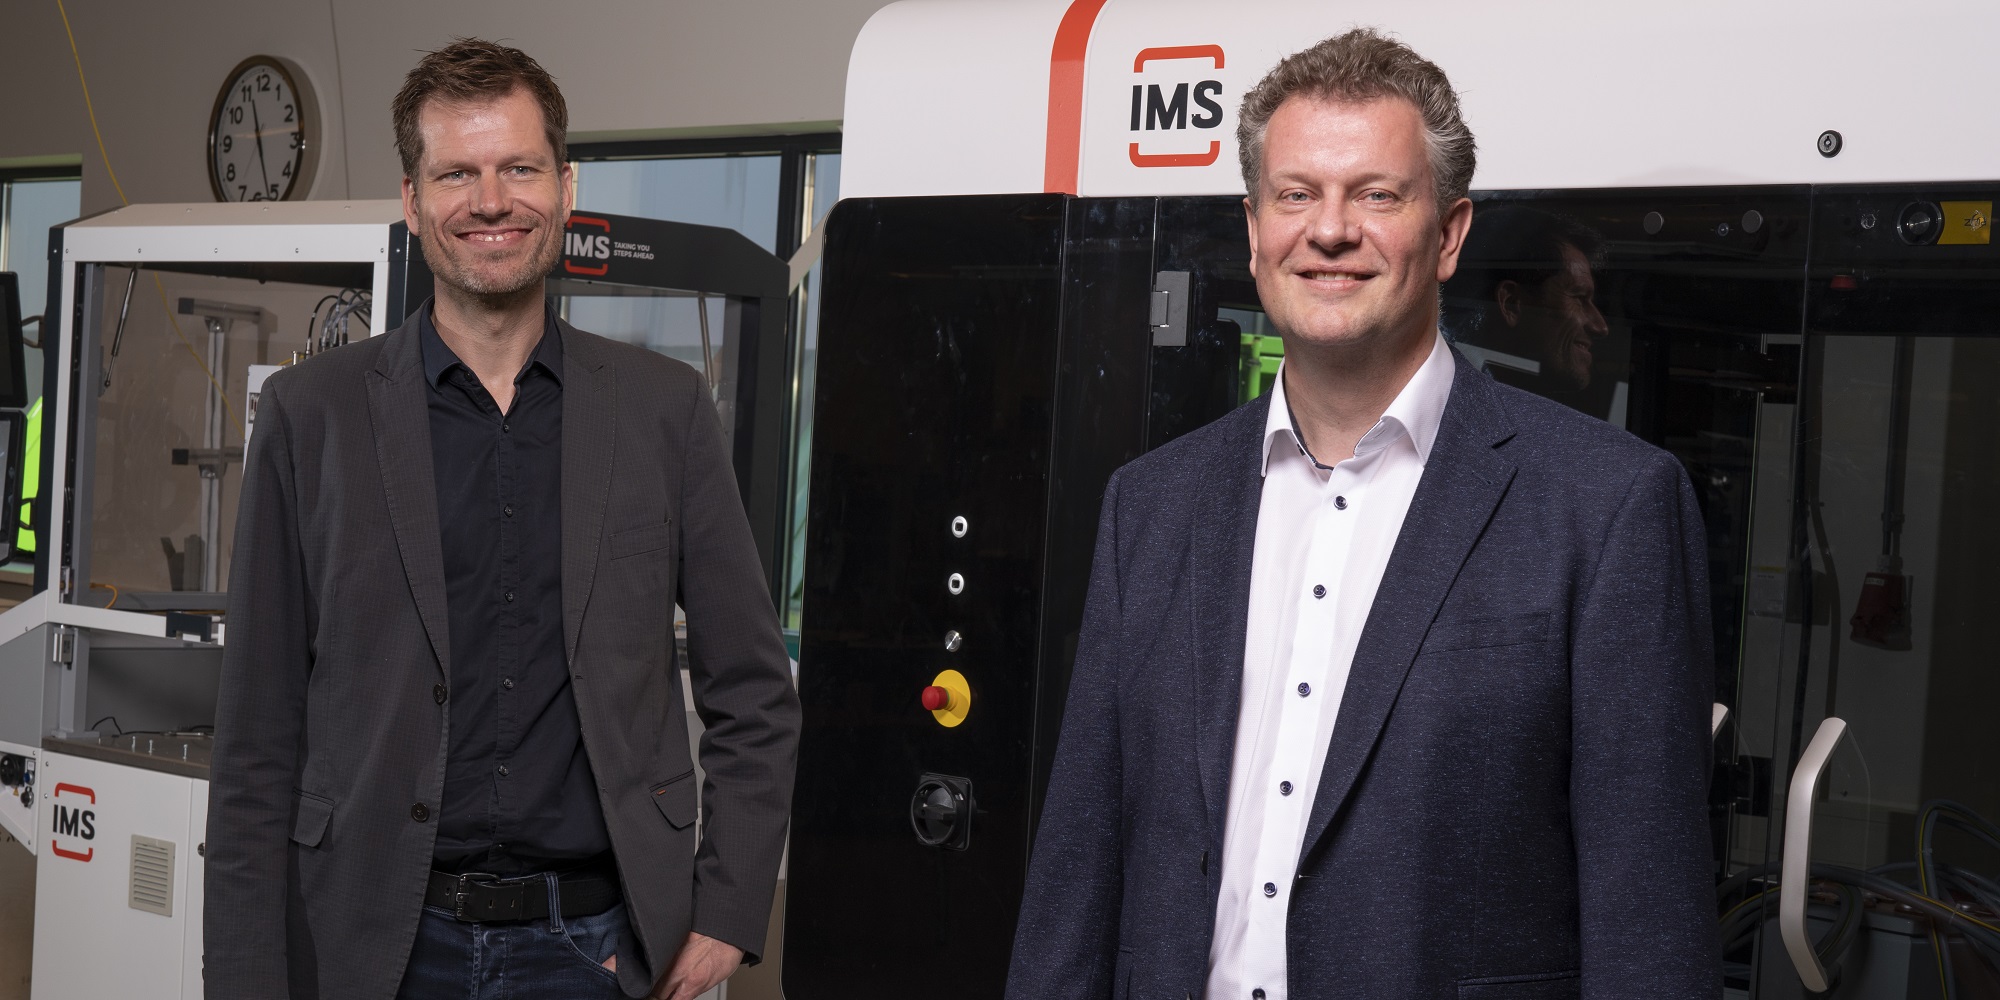 Interview with Martin Langkamp & Martijn Bouwhuis of IMS about system architecting